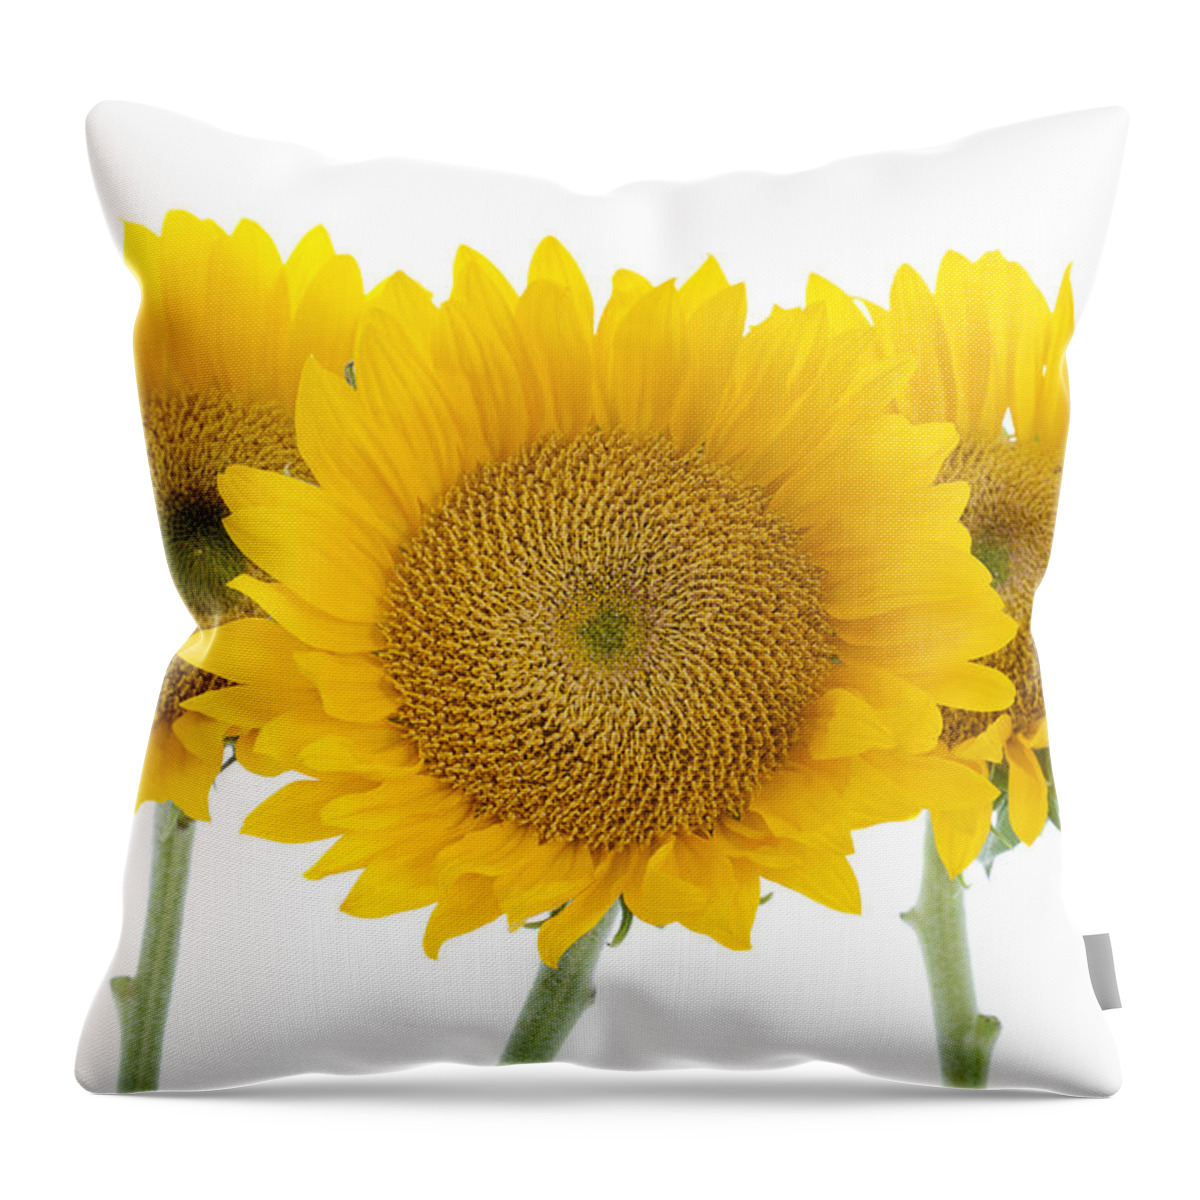 Sunflower Throw Pillow featuring the photograph Sunflower Trio by Patty Colabuono